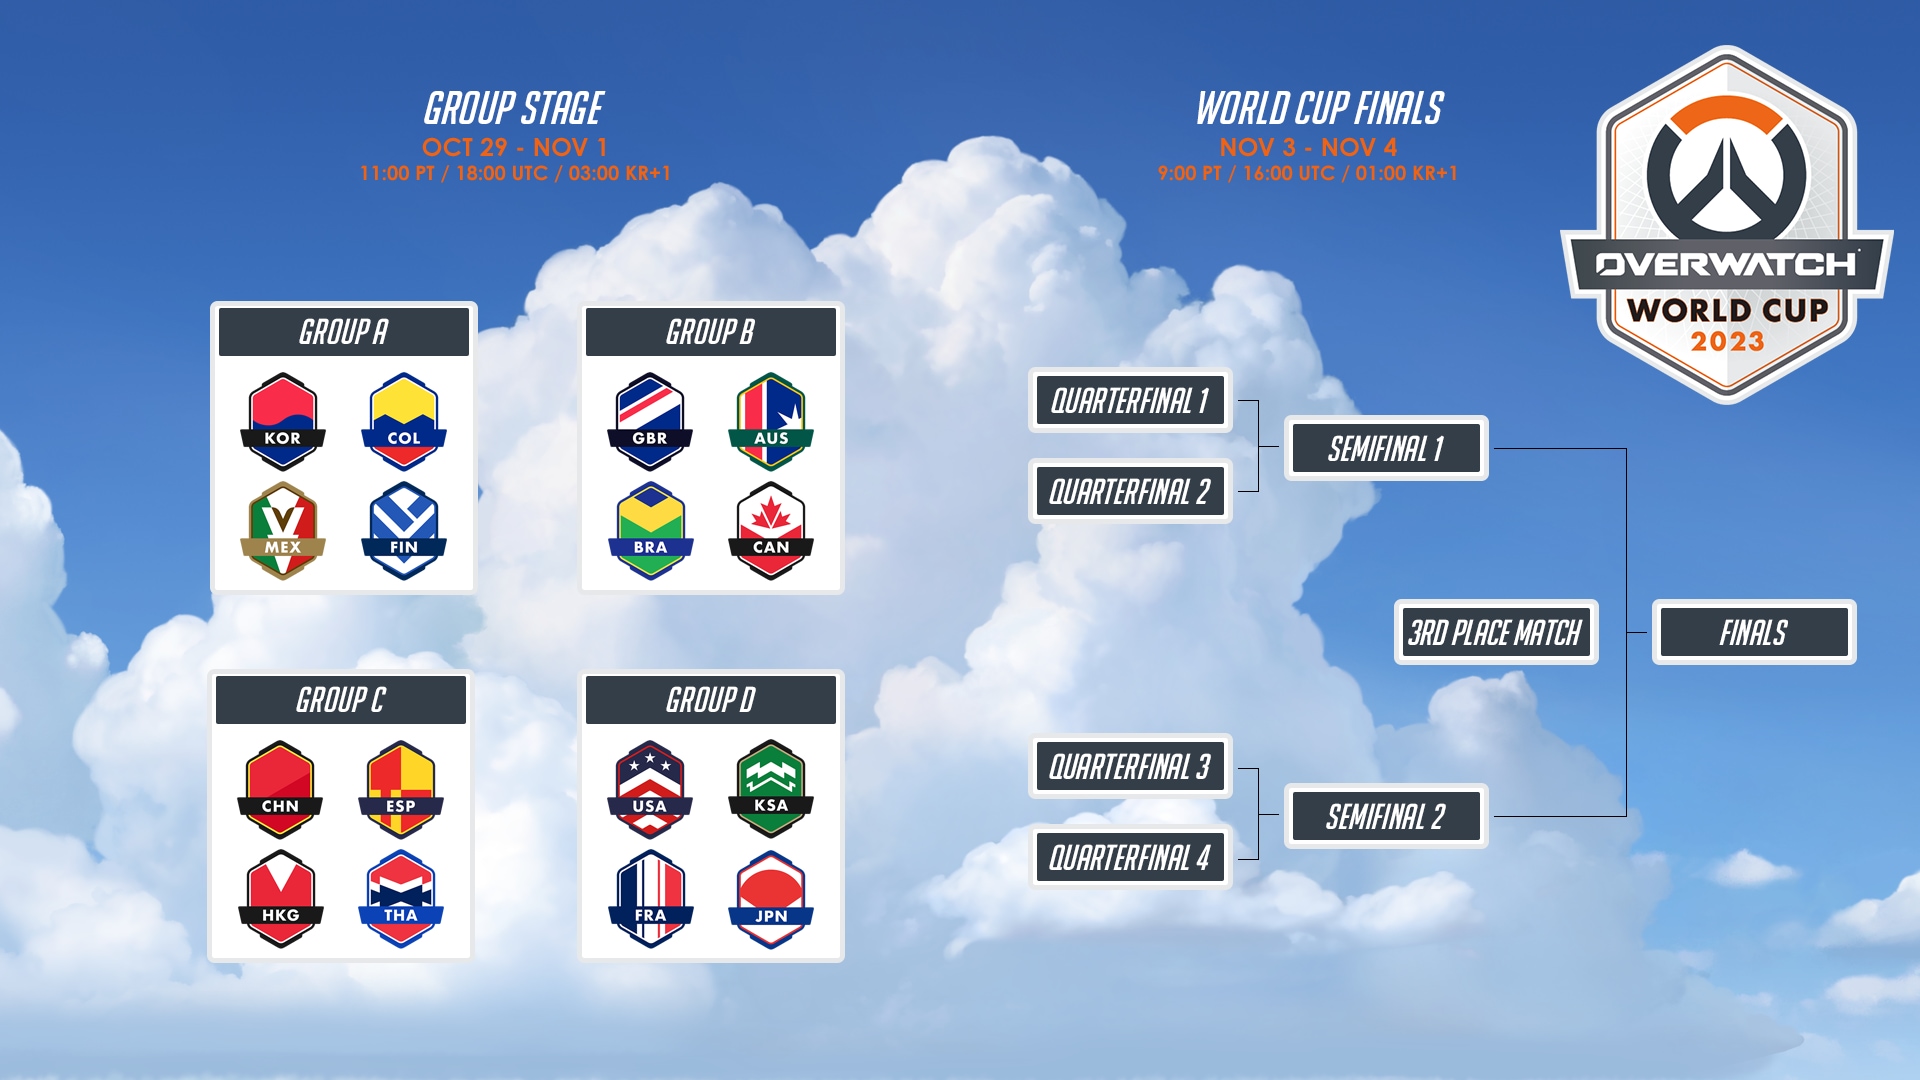 OWWC_2023_StageInforgraphic_BC01.png